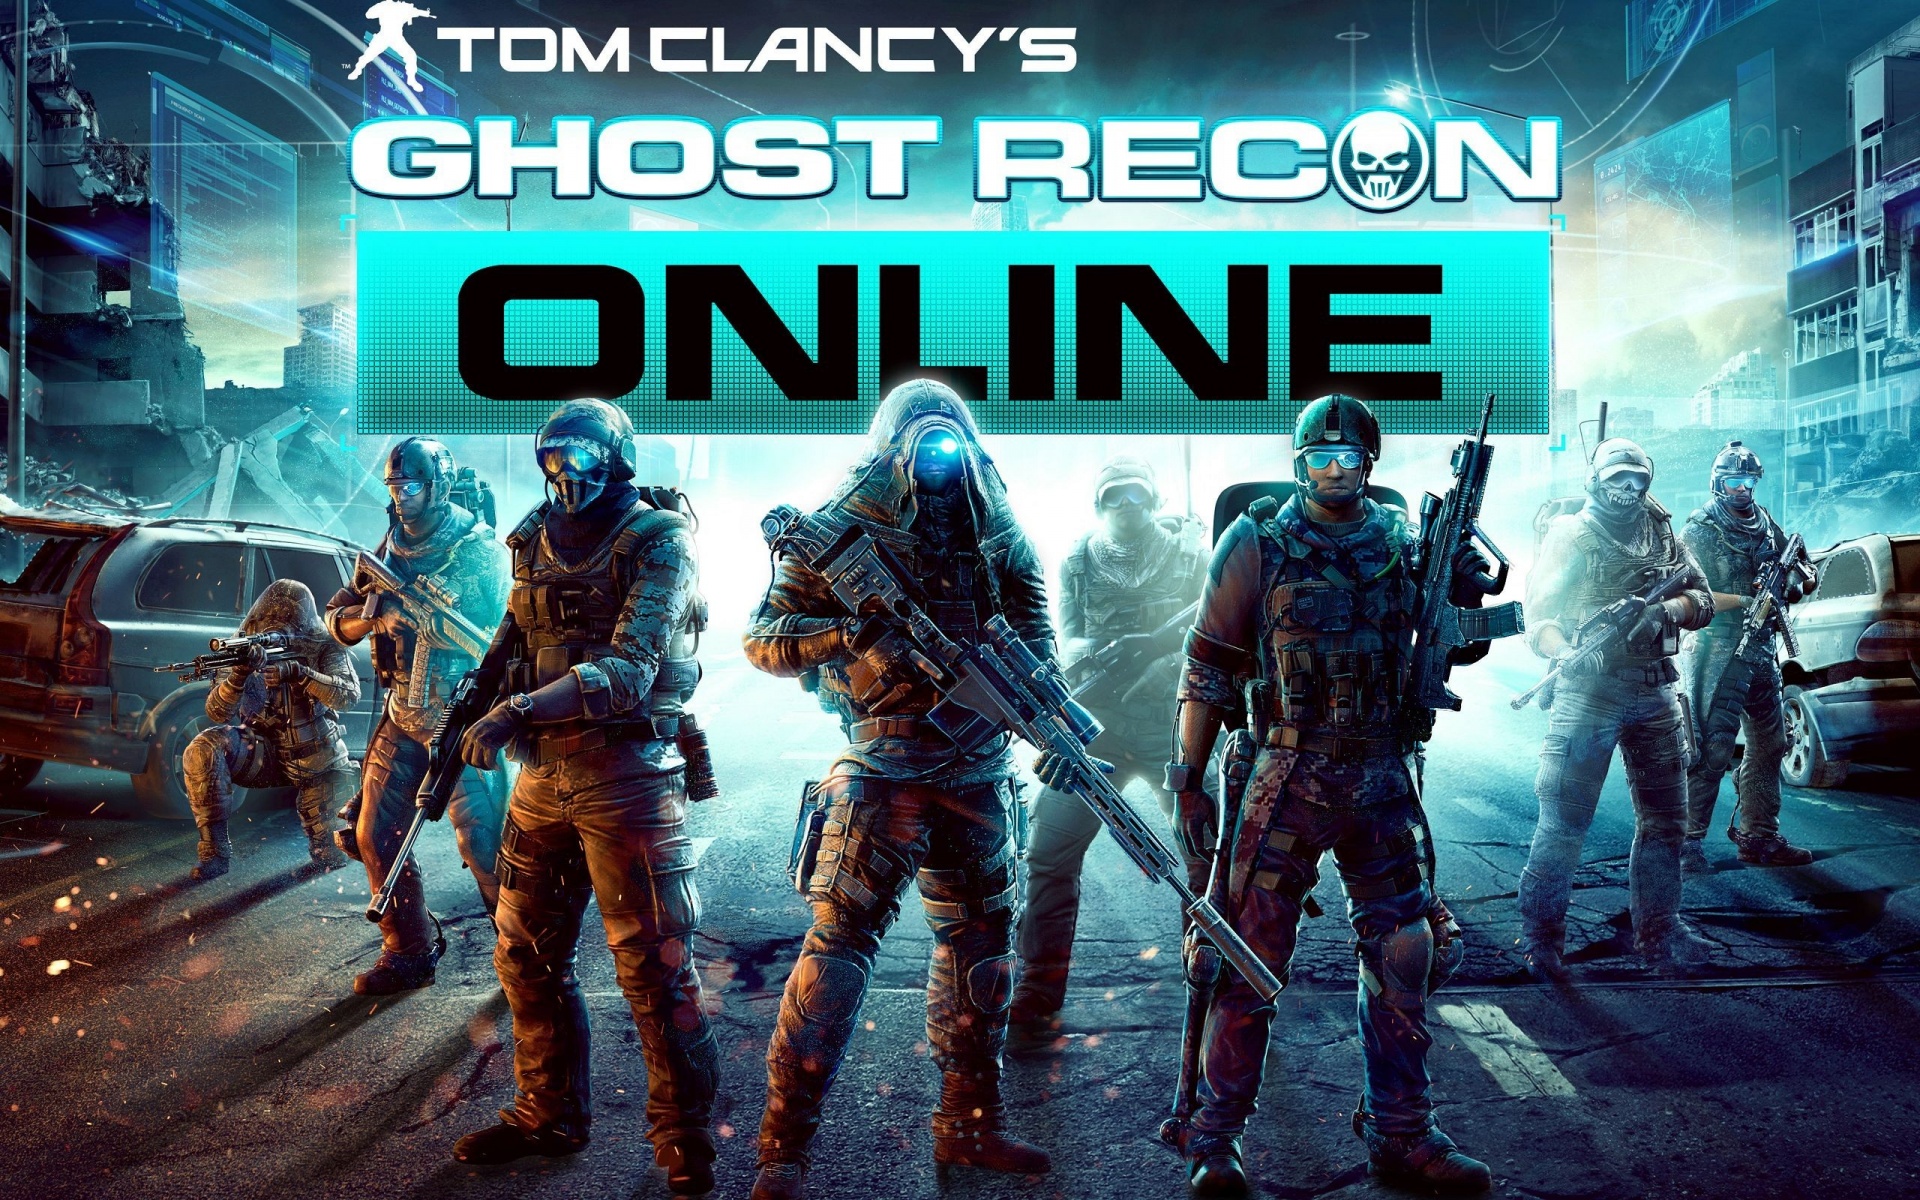 Ghost Recon Online Game